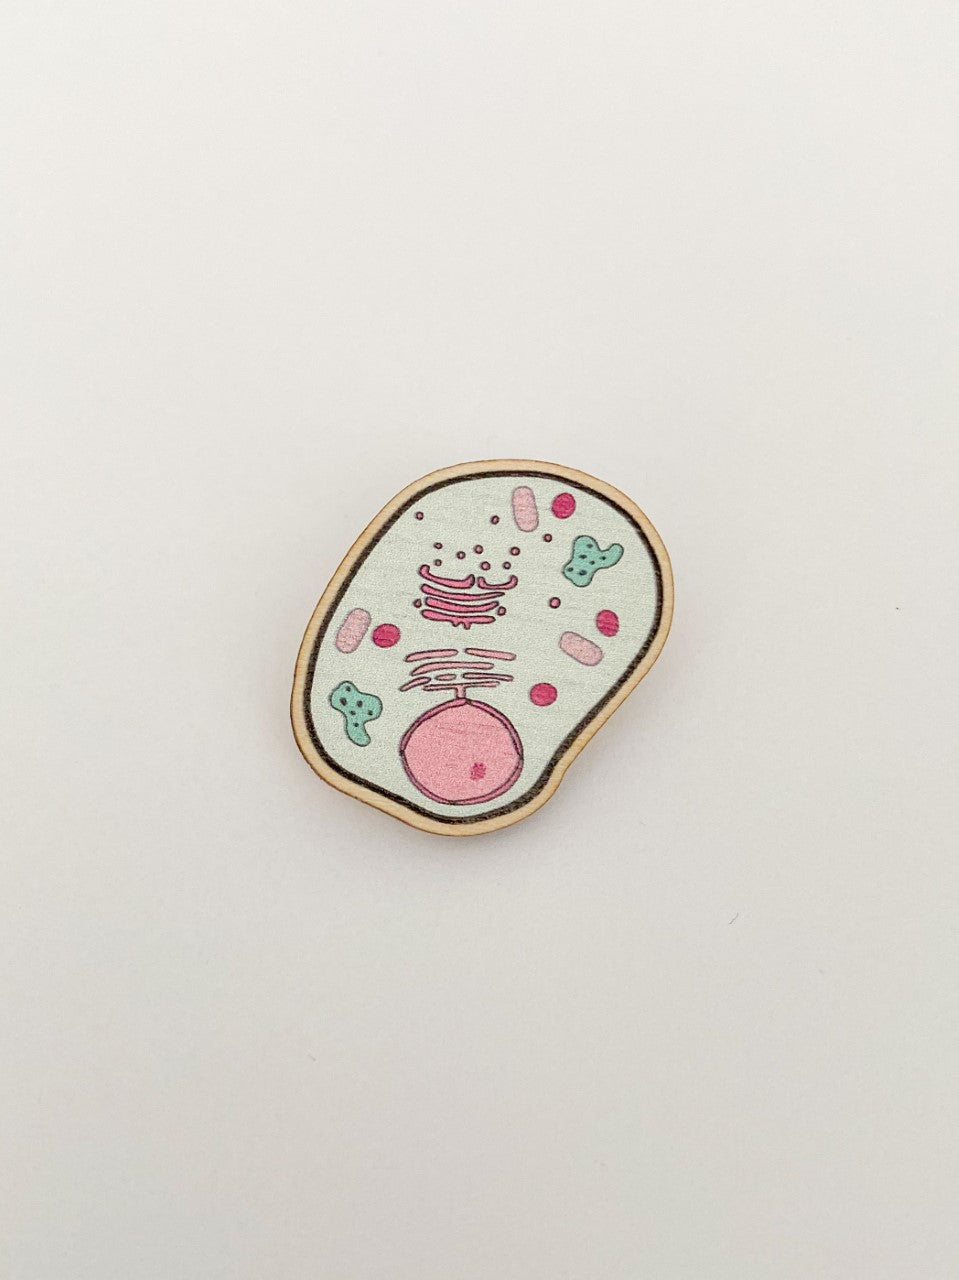 Cell pin badge is oval shaped with wonky edges. Drawing of the inside of a cell with black line around it. 